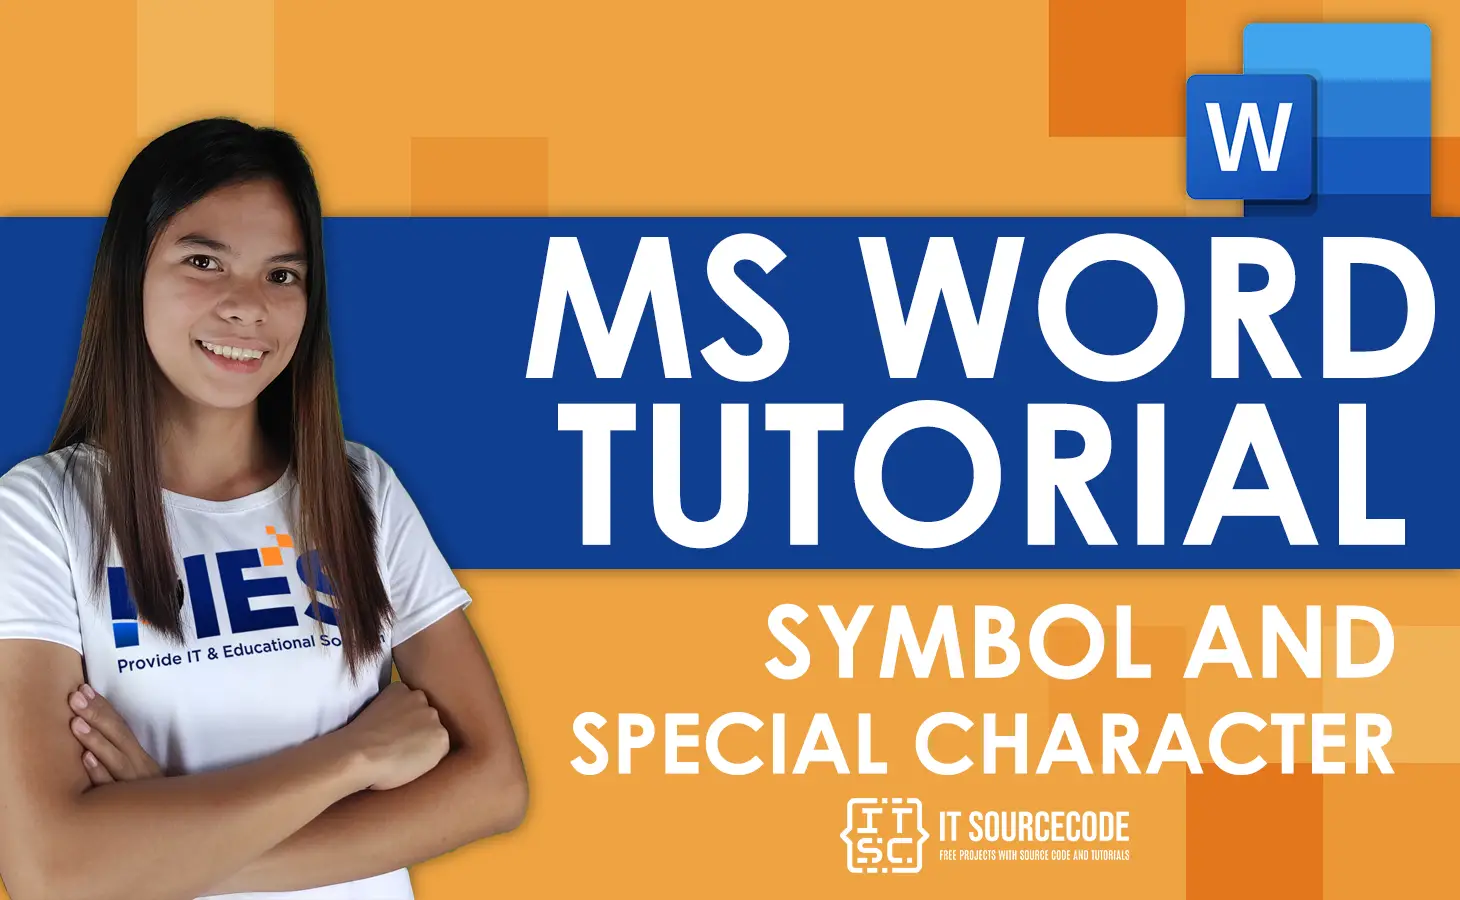 MS Word Tutorial Symbol and Special Character